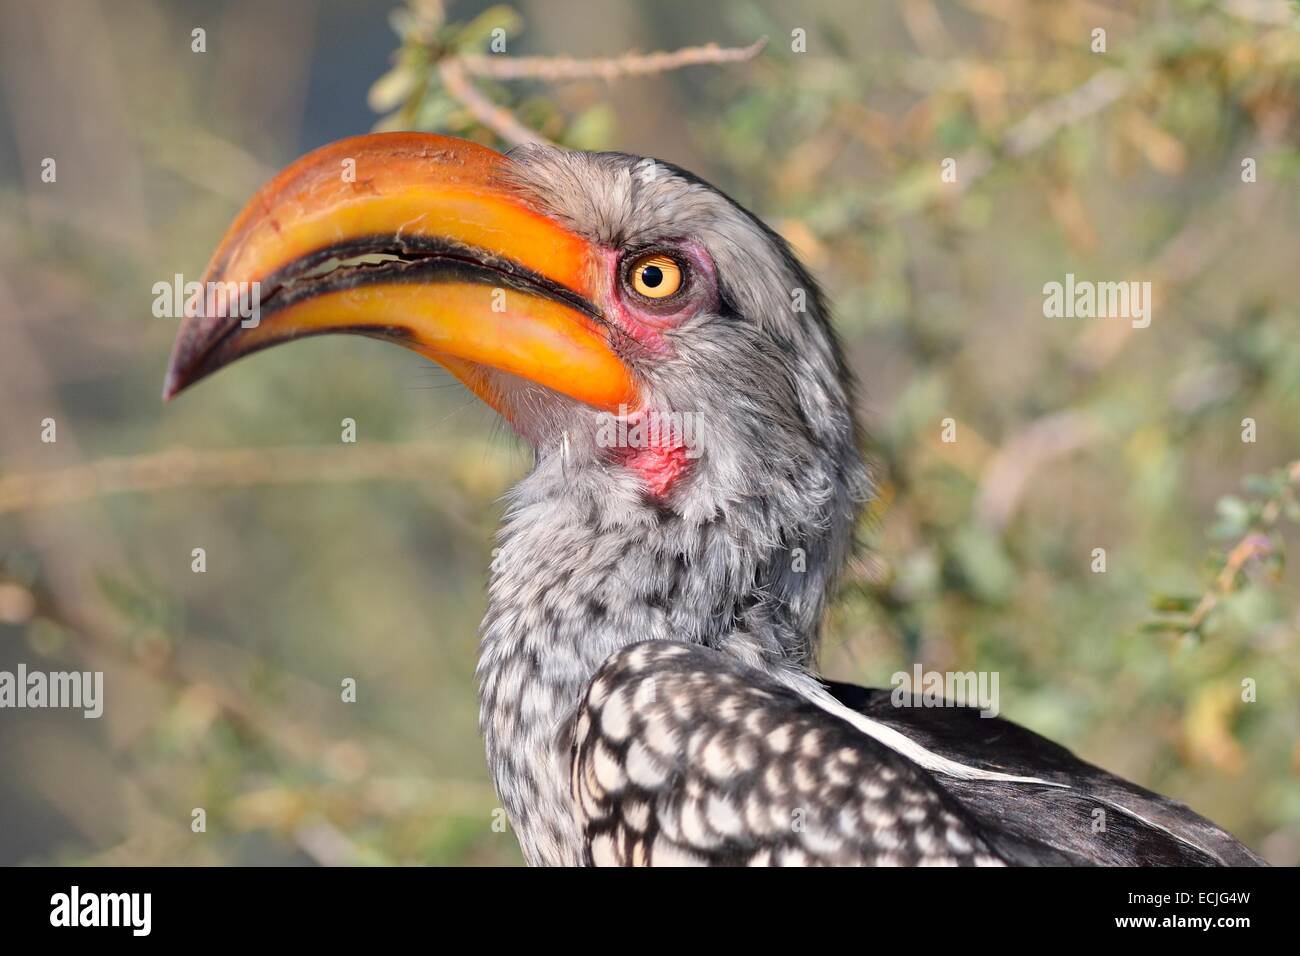 Southern Yellow-billed Hornbill (Tockus leucomelas), perched, Kgalagadi Transfrontier Park, Northern Cape, South Africa, Africa Stock Photo